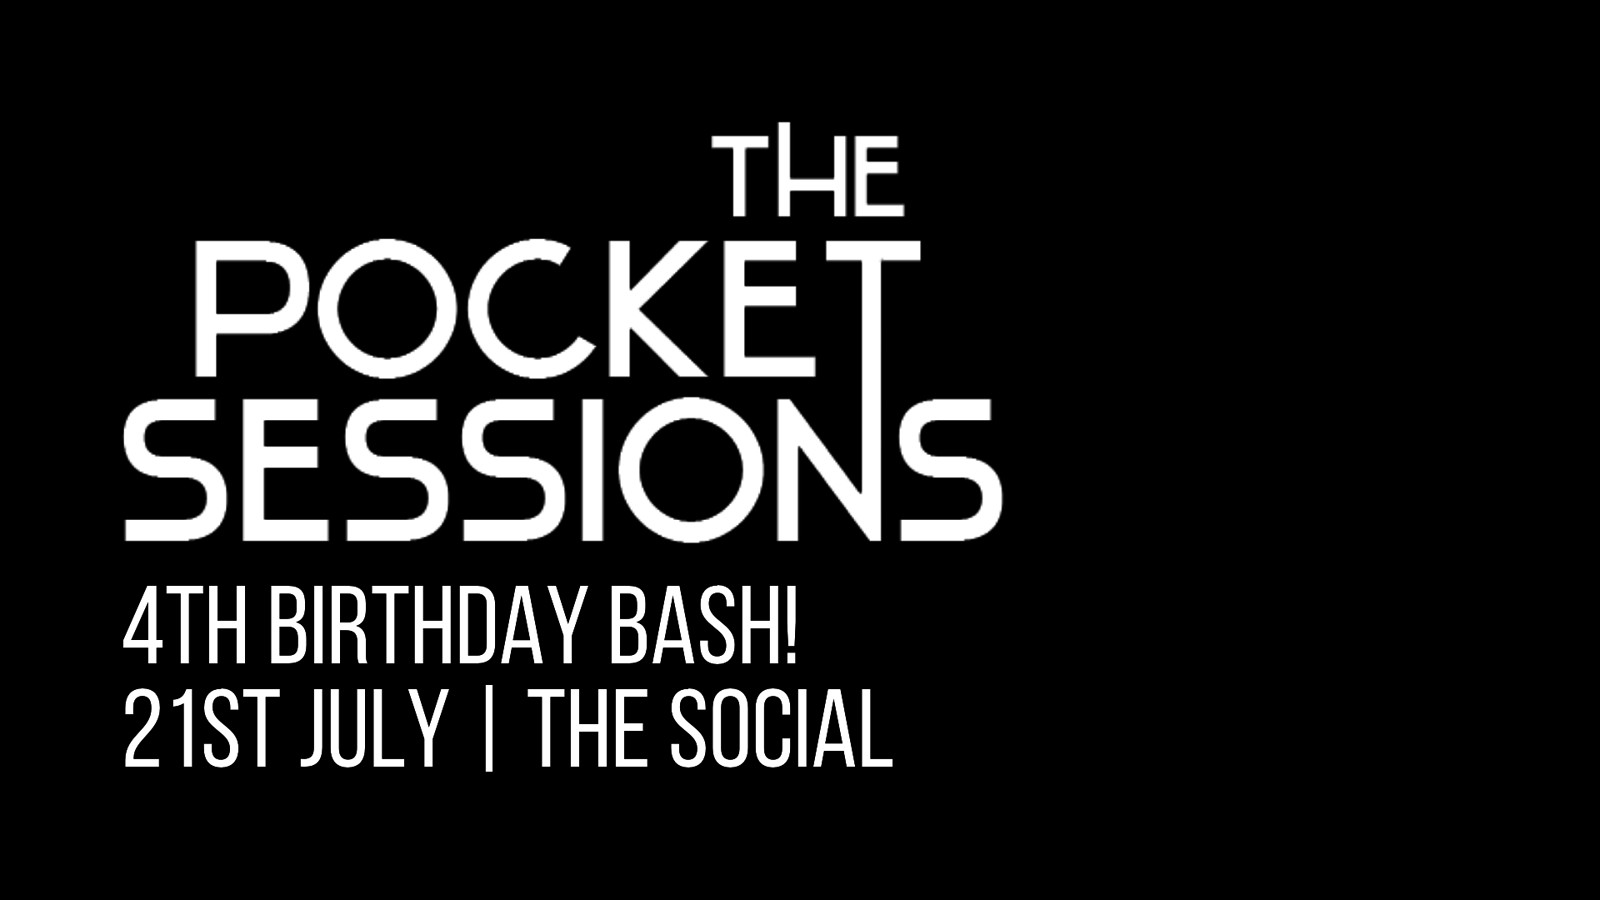 The Pocket Sessions Fourth Birthday Bash at The Social